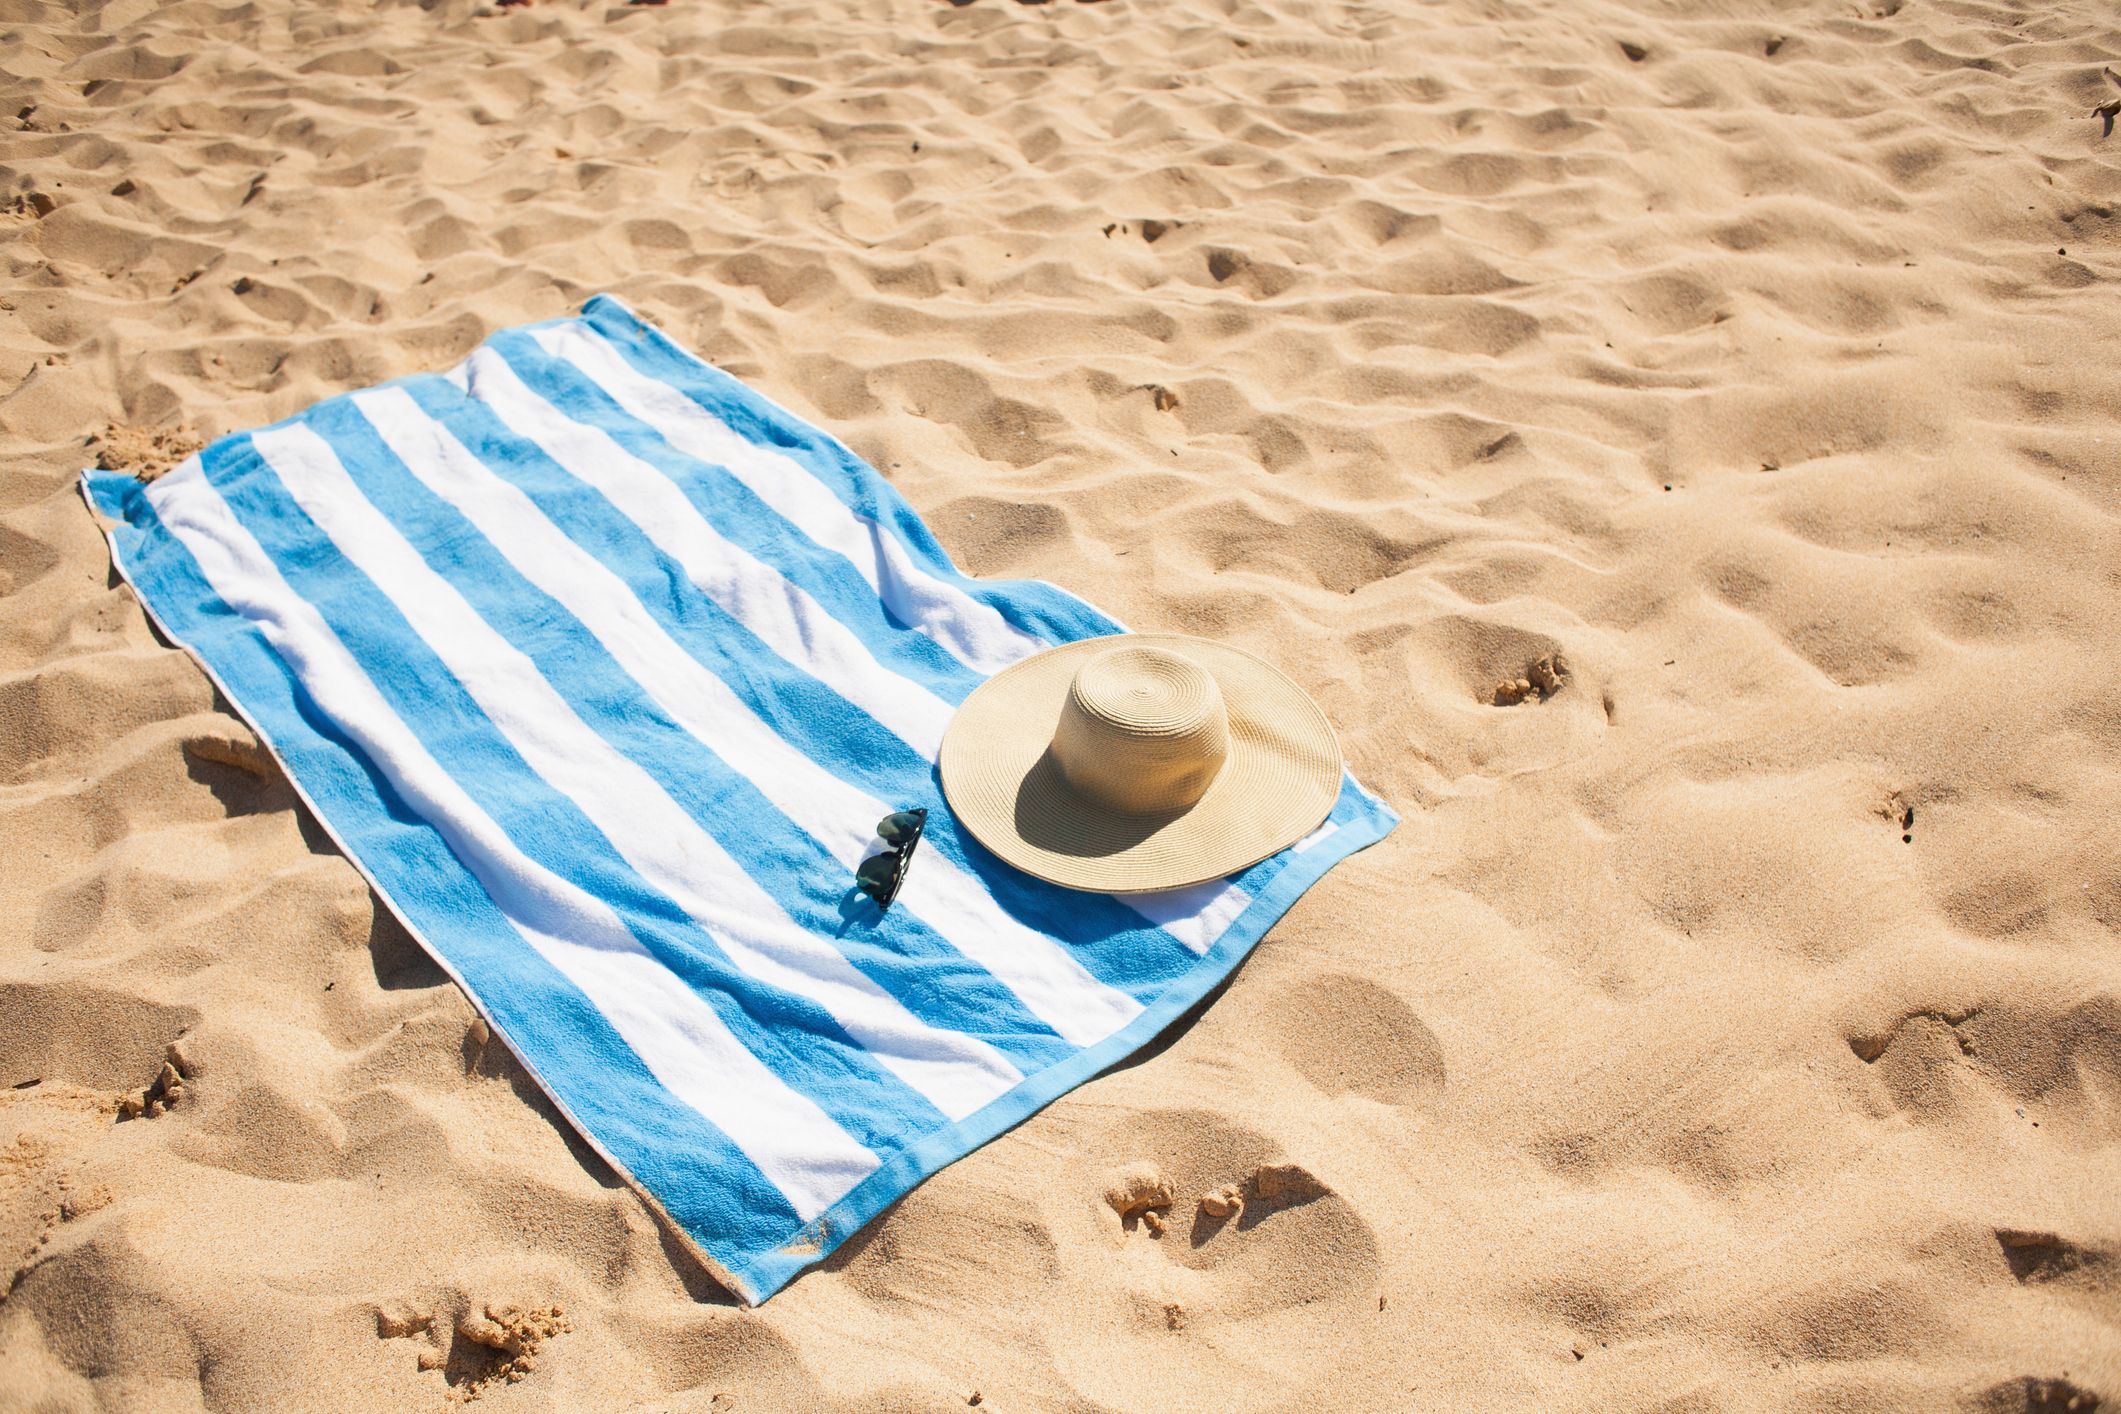 https://hips.hearstapps.com/hmg-prod/images/striped-beach-towel-on-sand-with-hat-and-glasses-royalty-free-image-1595590181.jpg